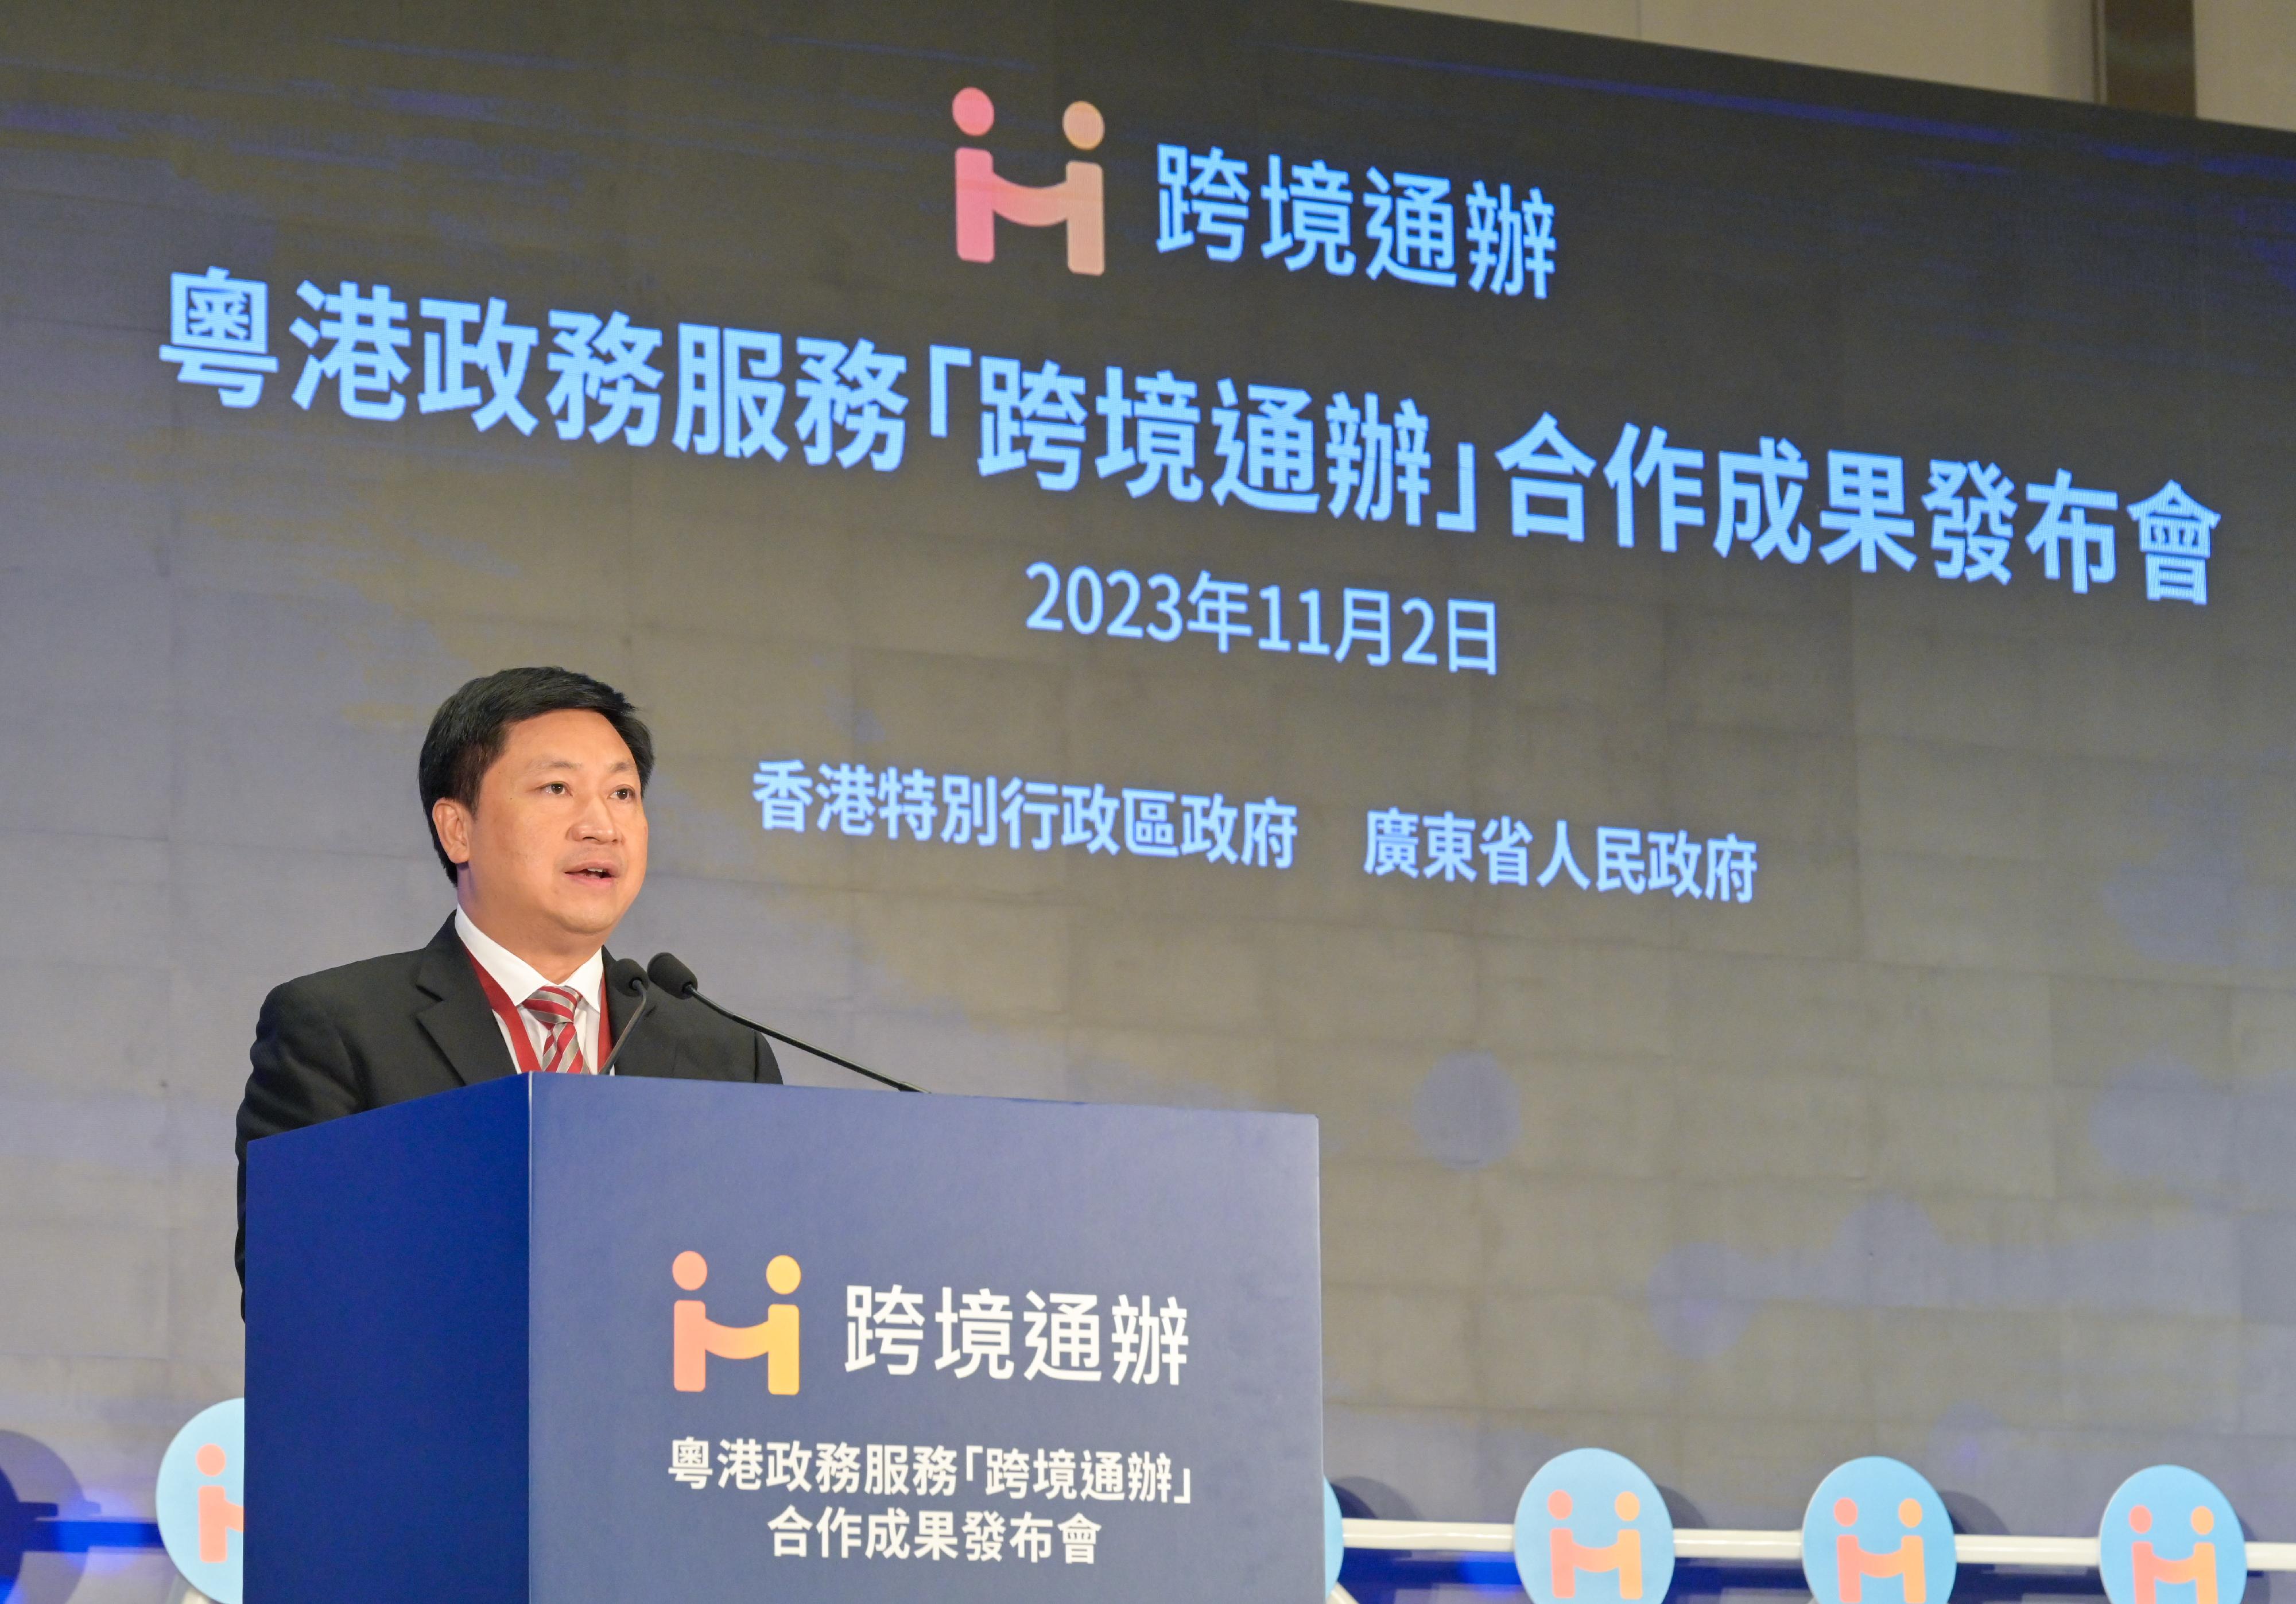 Deputy Secretary General of the People's Government of Guangdong Province Mr Xu Dianhui speaks at the ceremony for promulgation of the Hong Kong/Guangdong Cross-boundary Public Services Co-operation Achievements today (November 2).